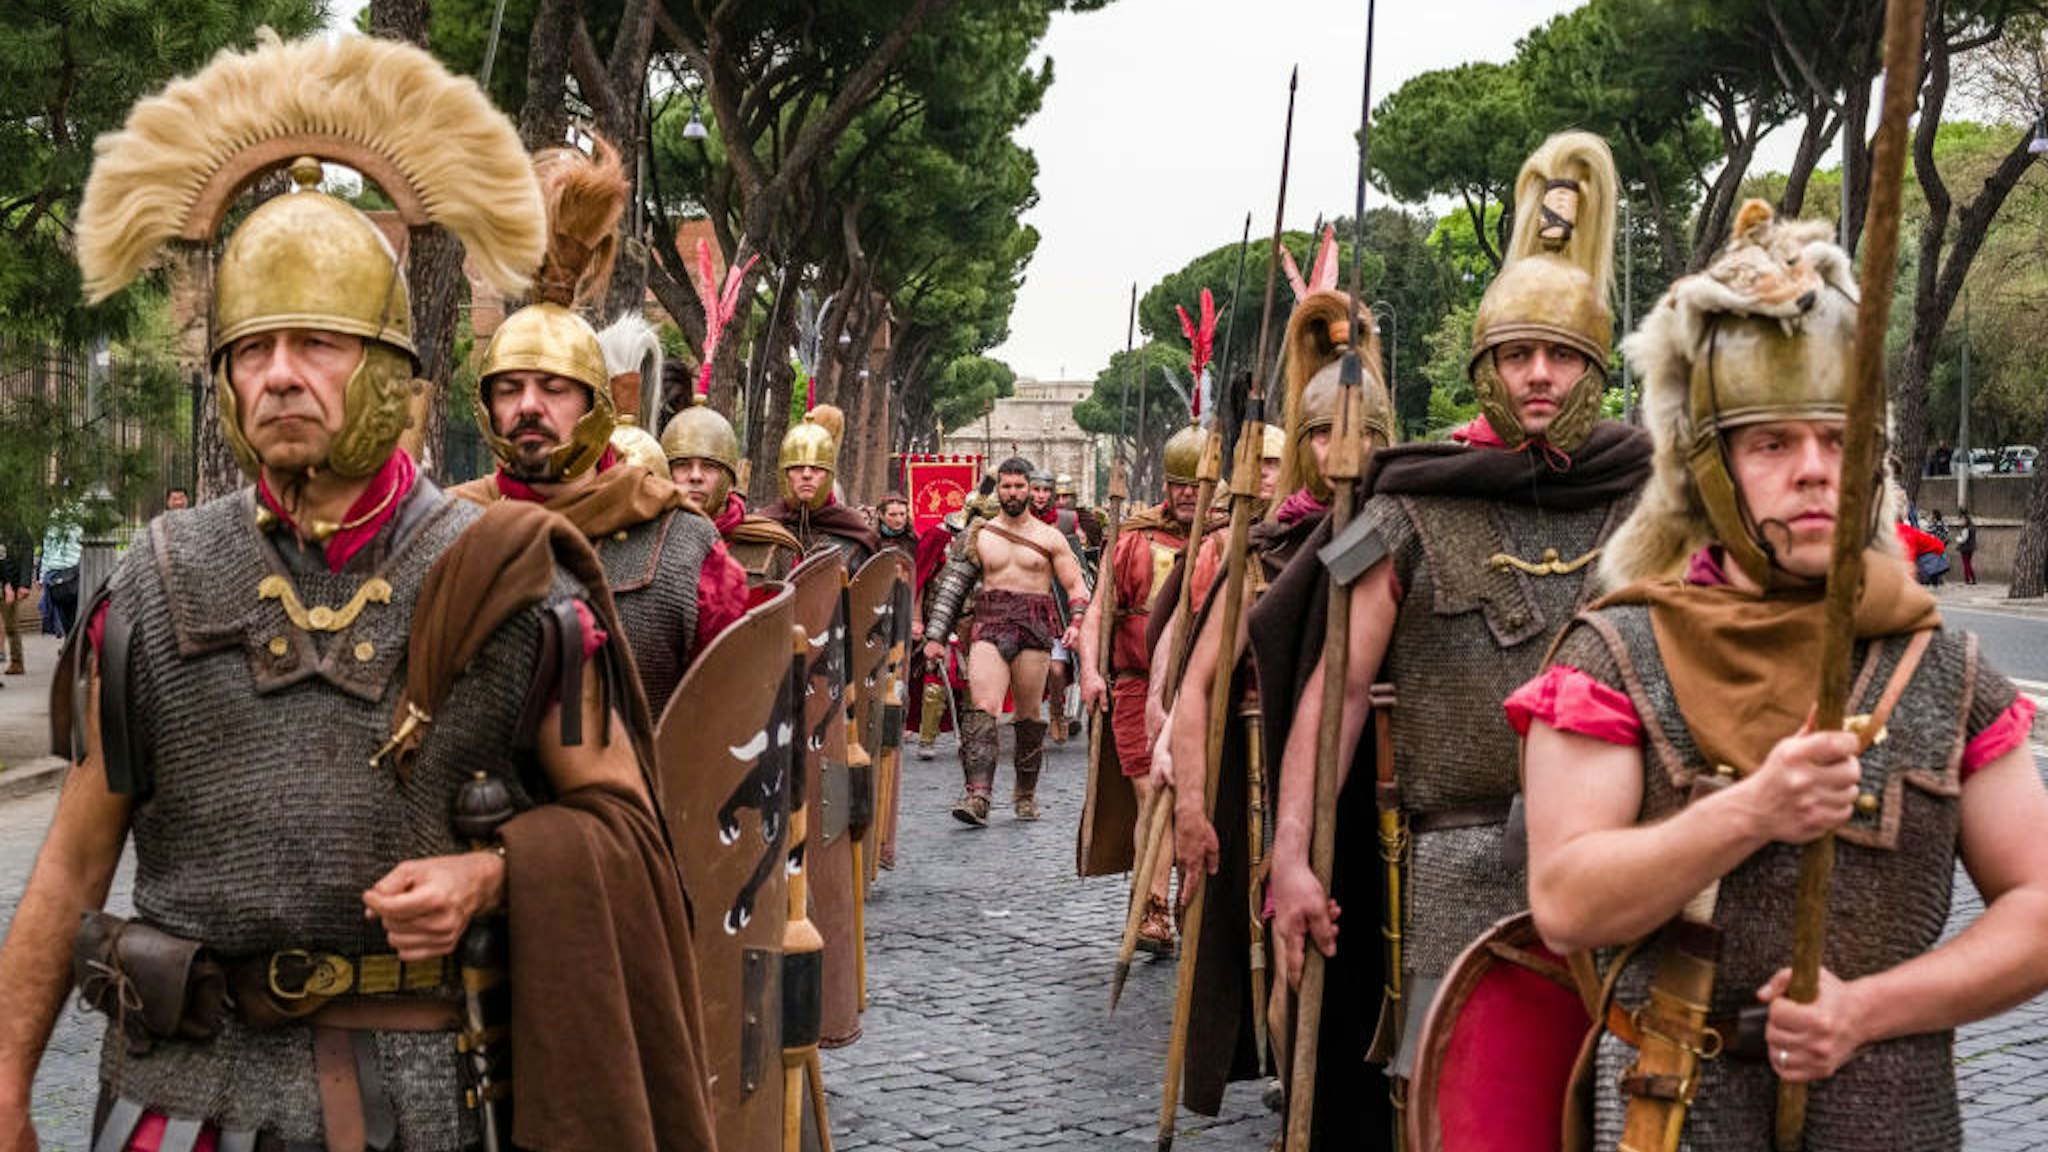 Historically dressed people taking part of the annual festival Natale di Roma, Rome's foundation anniversary. (Photo by Frank Bienewald/LightRocket via Getty Images)